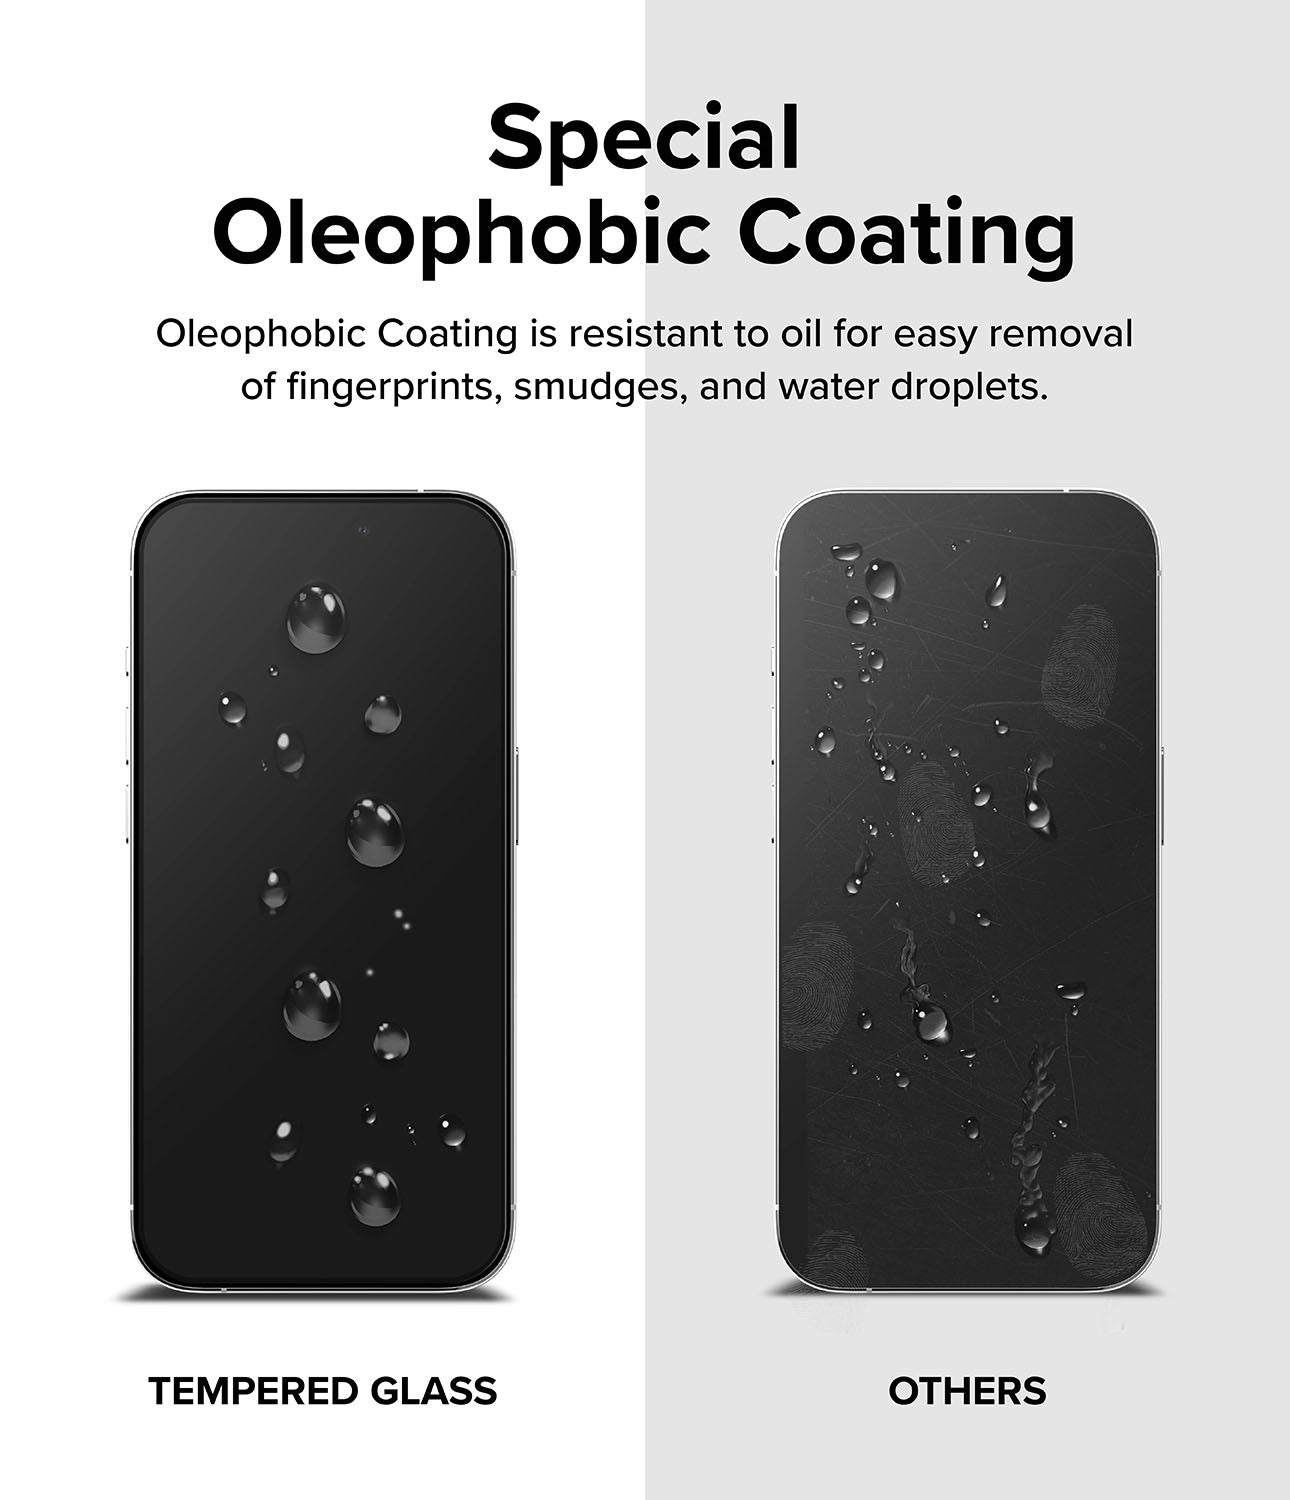 iPhone 15 Pro Max Screen Protector | Full Cover Glass - Special Oleophobic Coating. Oleophobic Coating is resistant to oil for easy removal of fingerprints, smudges, and water droplets.